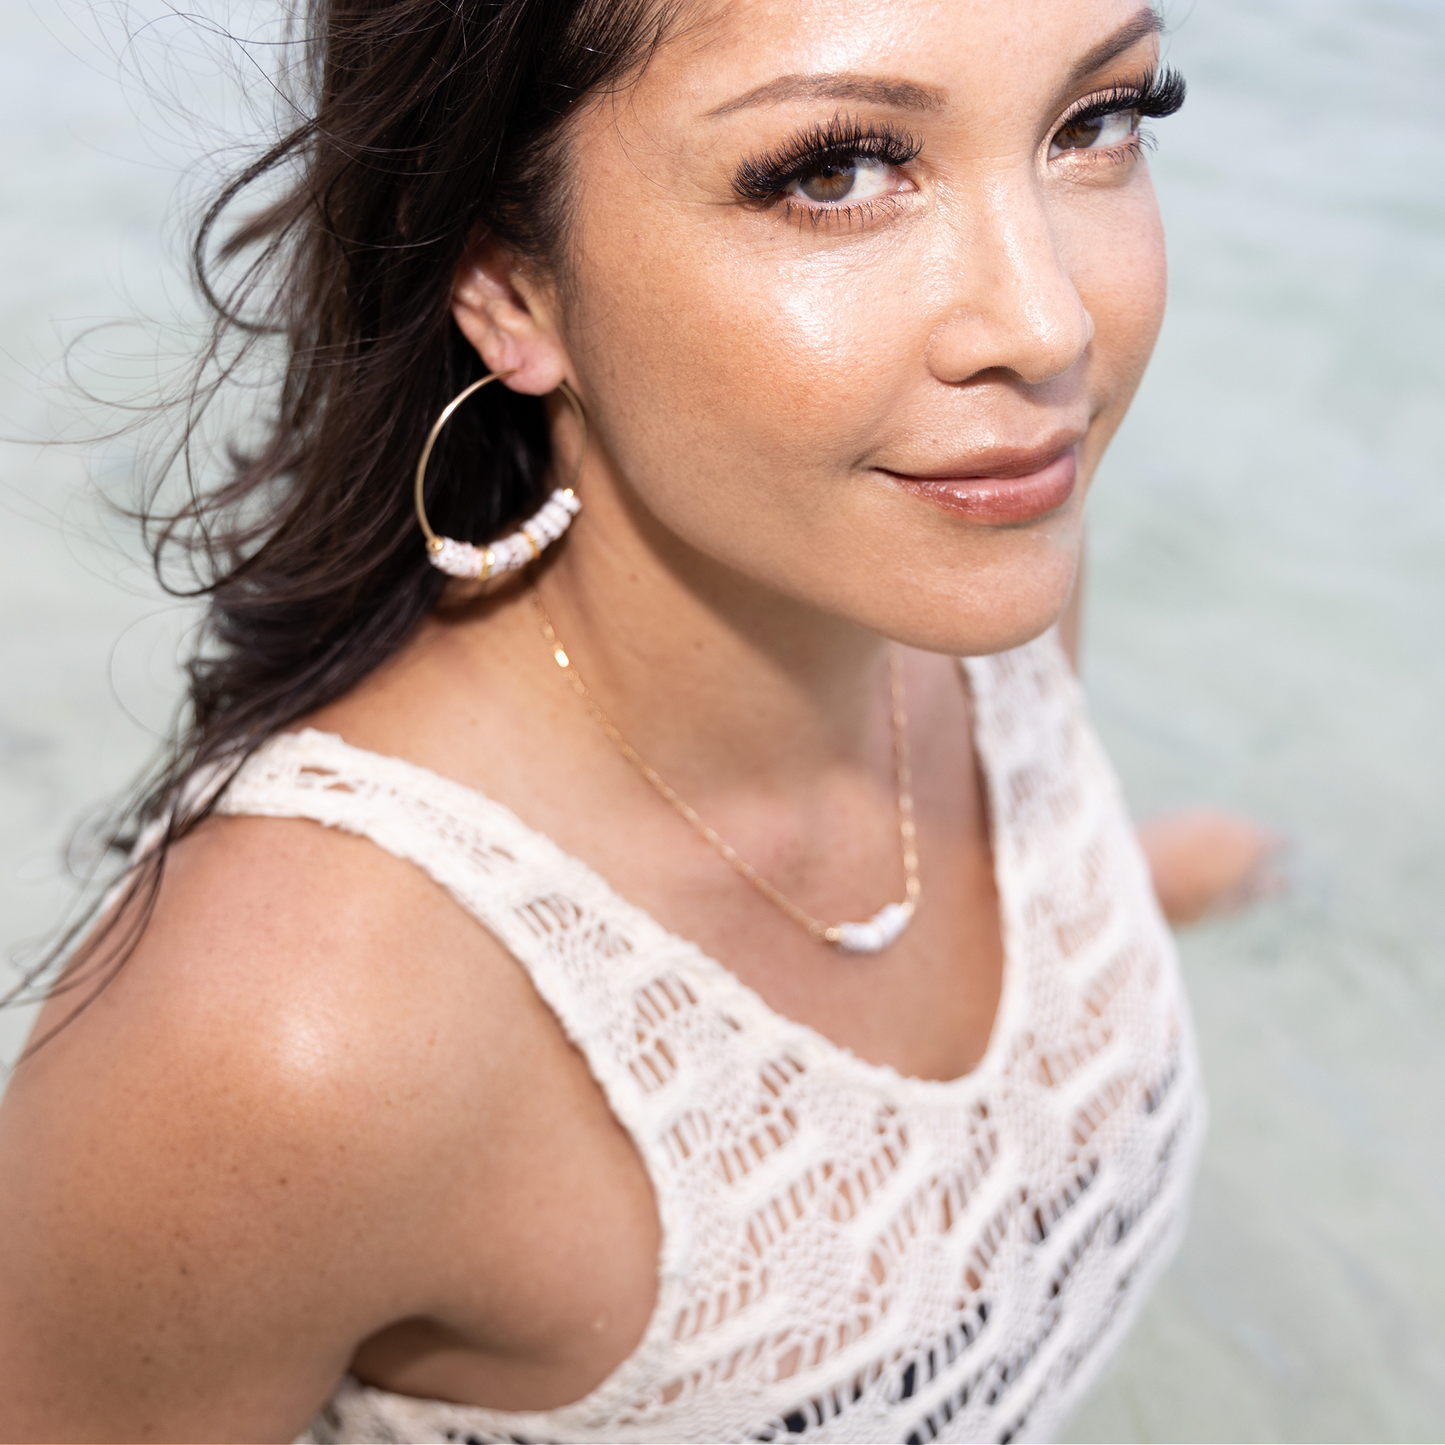 Beautiful Hawaiian woman  on a beach looking at the camera wearing puka shell necklace and hoop earrings Pukanui Hoop Earrings - 21 Degrees North Designs - 21ºN